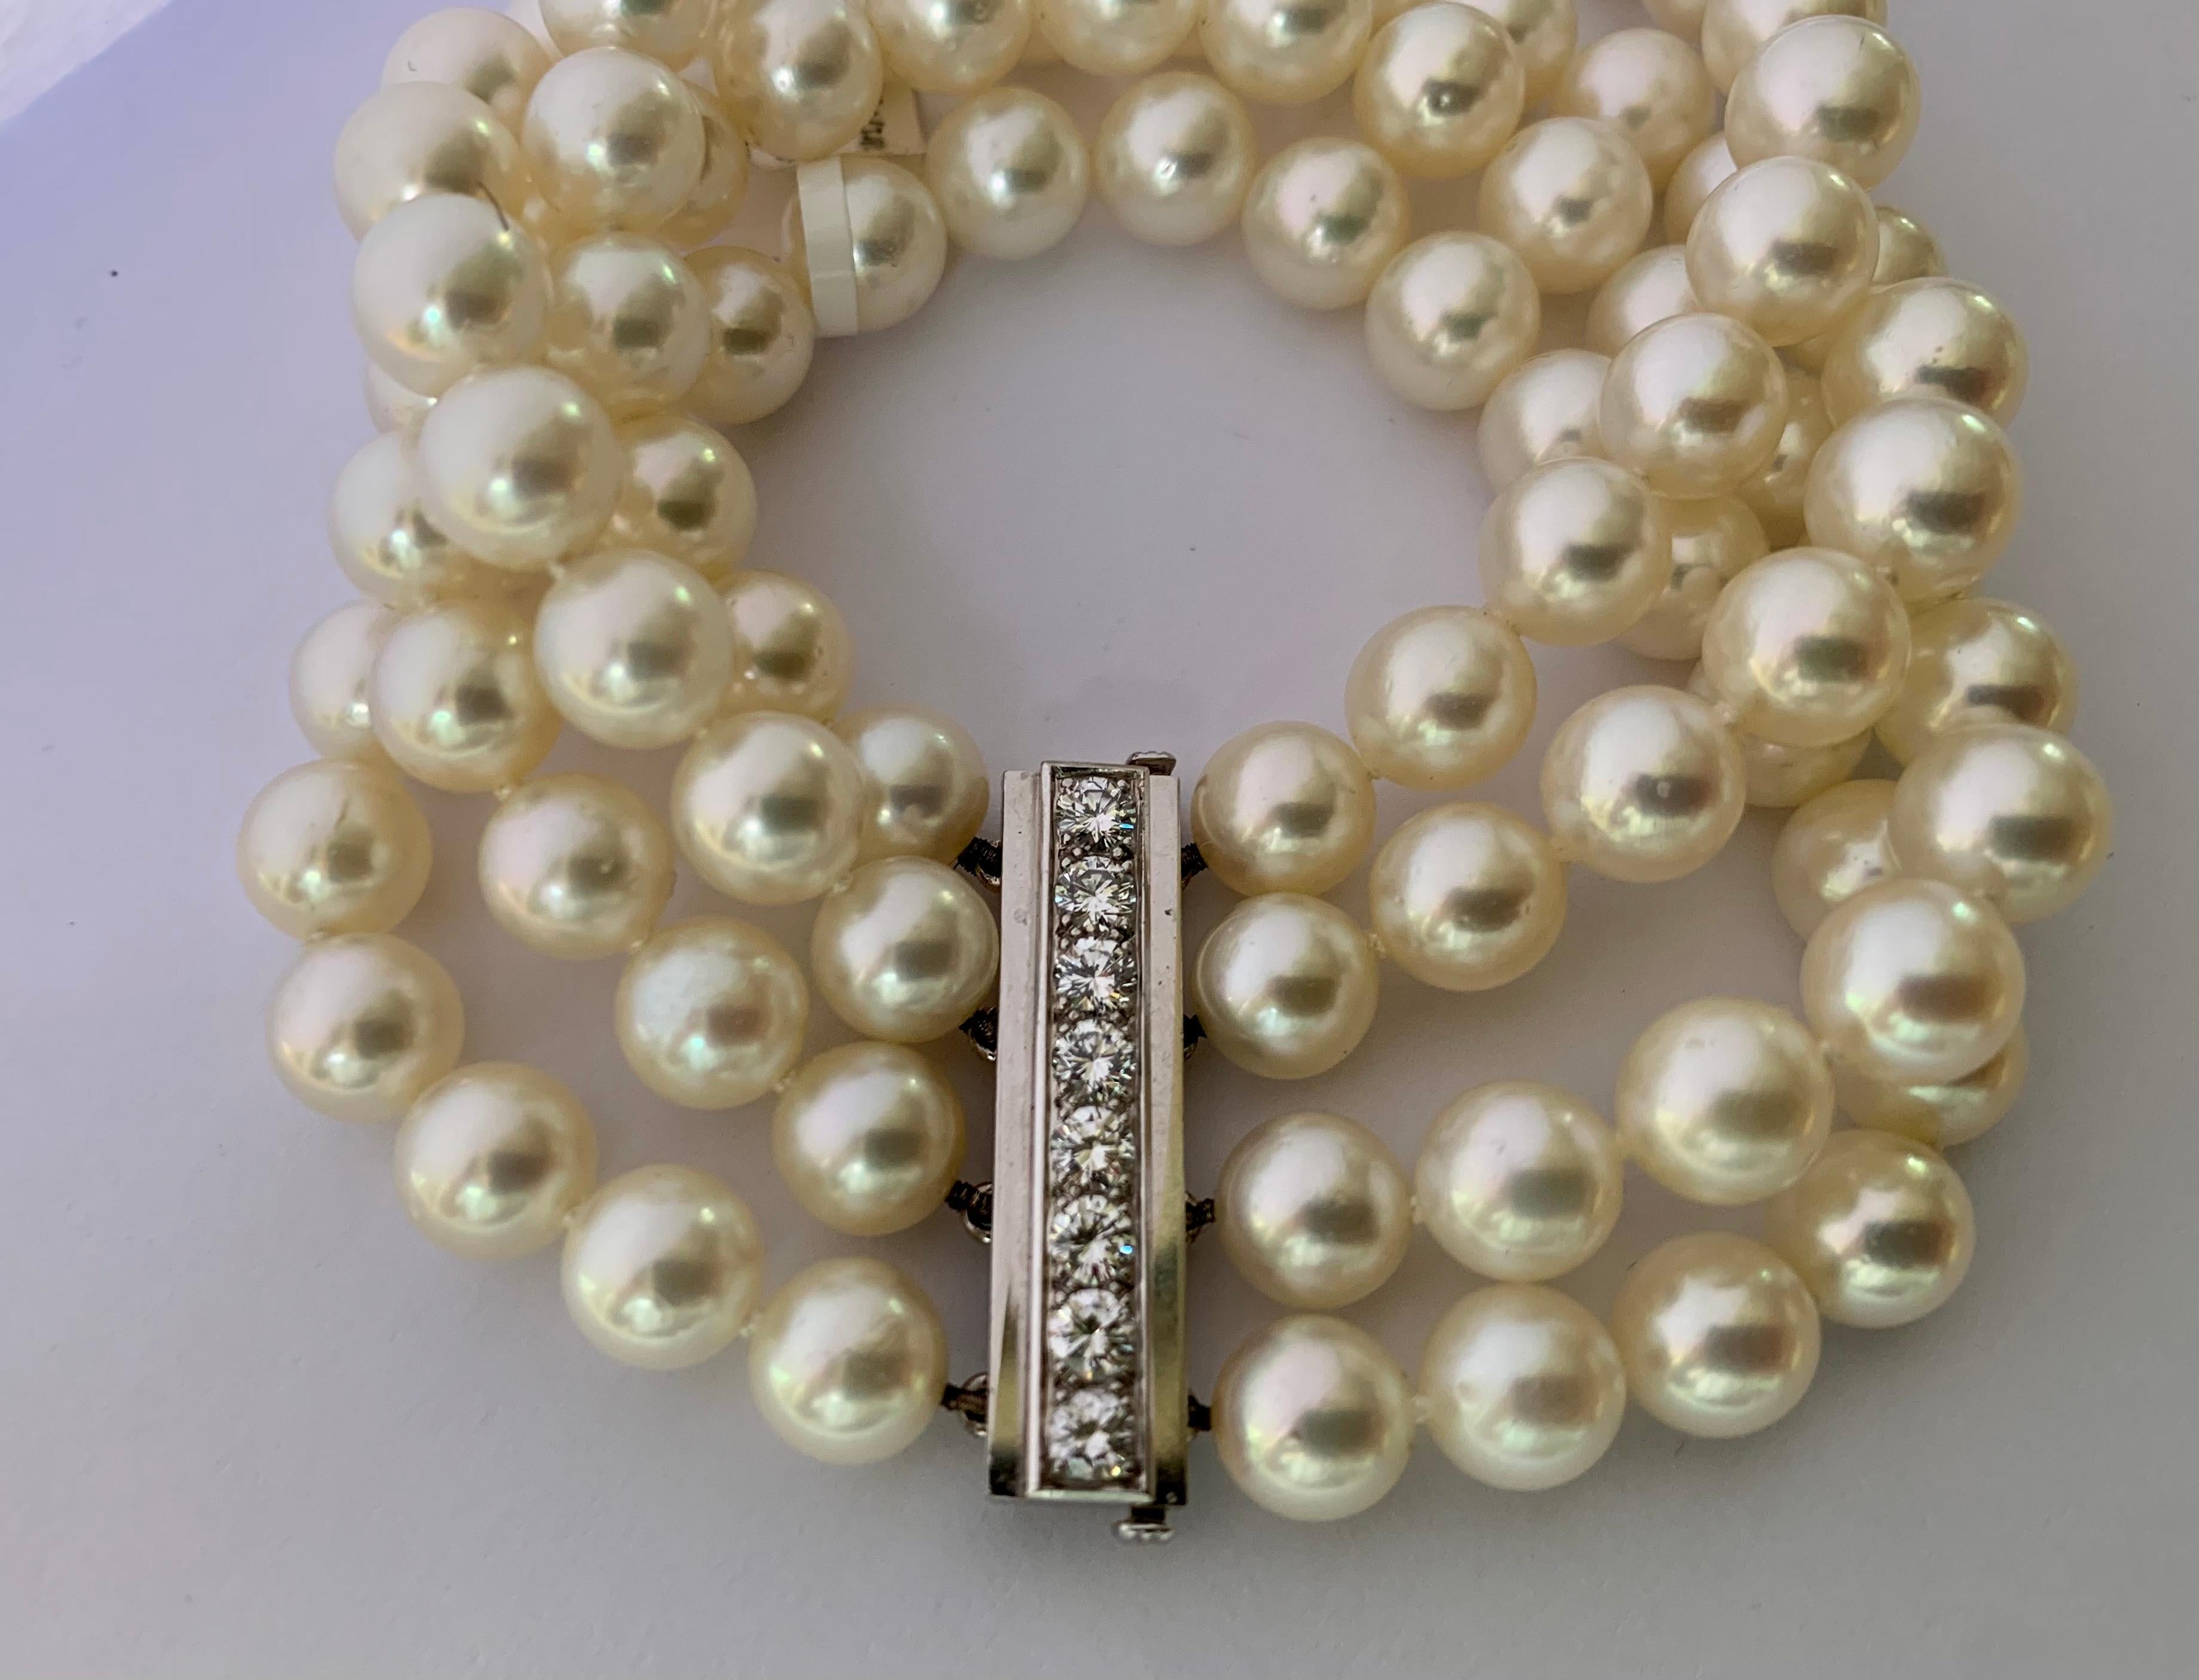 69 white cultured  Akoya pearls, measuring 7.5mm-8.00mm each, are strung on four rows of this lovely bracelet. The linear 18 Karat white gold  clasp features 8 round brilliant cut diamonds, weighing ca. 1.20 ct, F color, vs clarity.  The bracelet